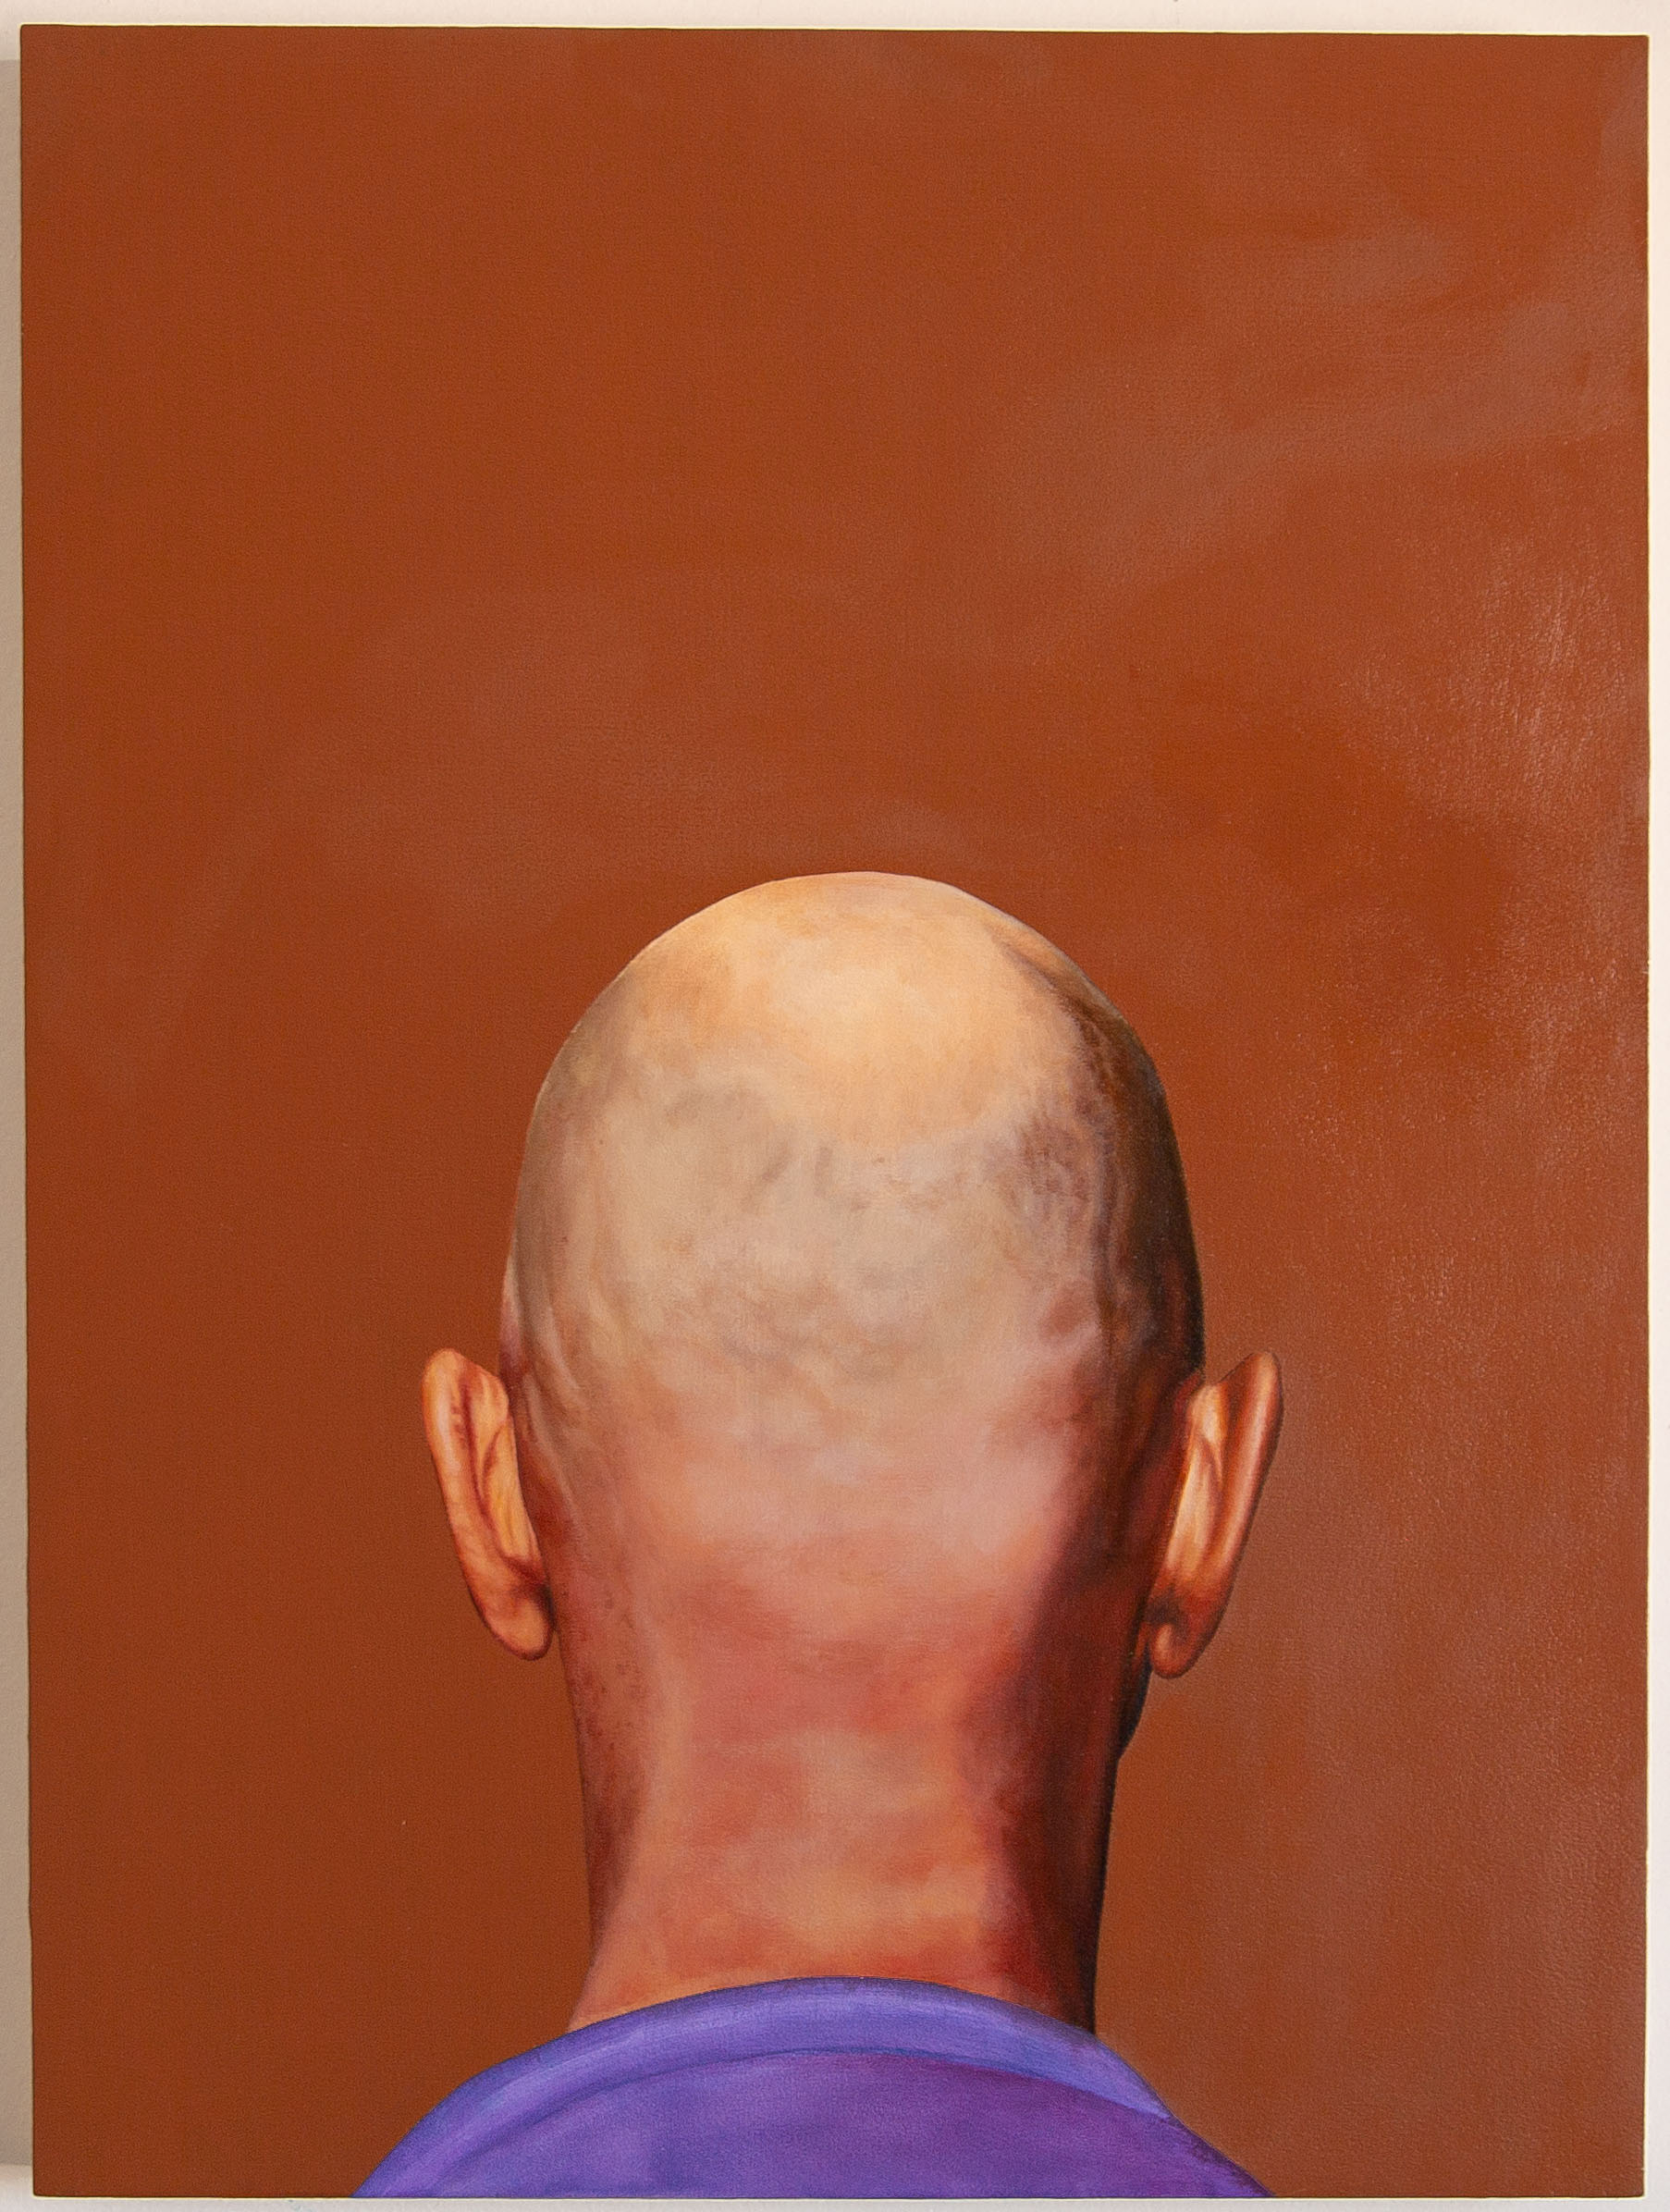 Back of shaved head against brown background